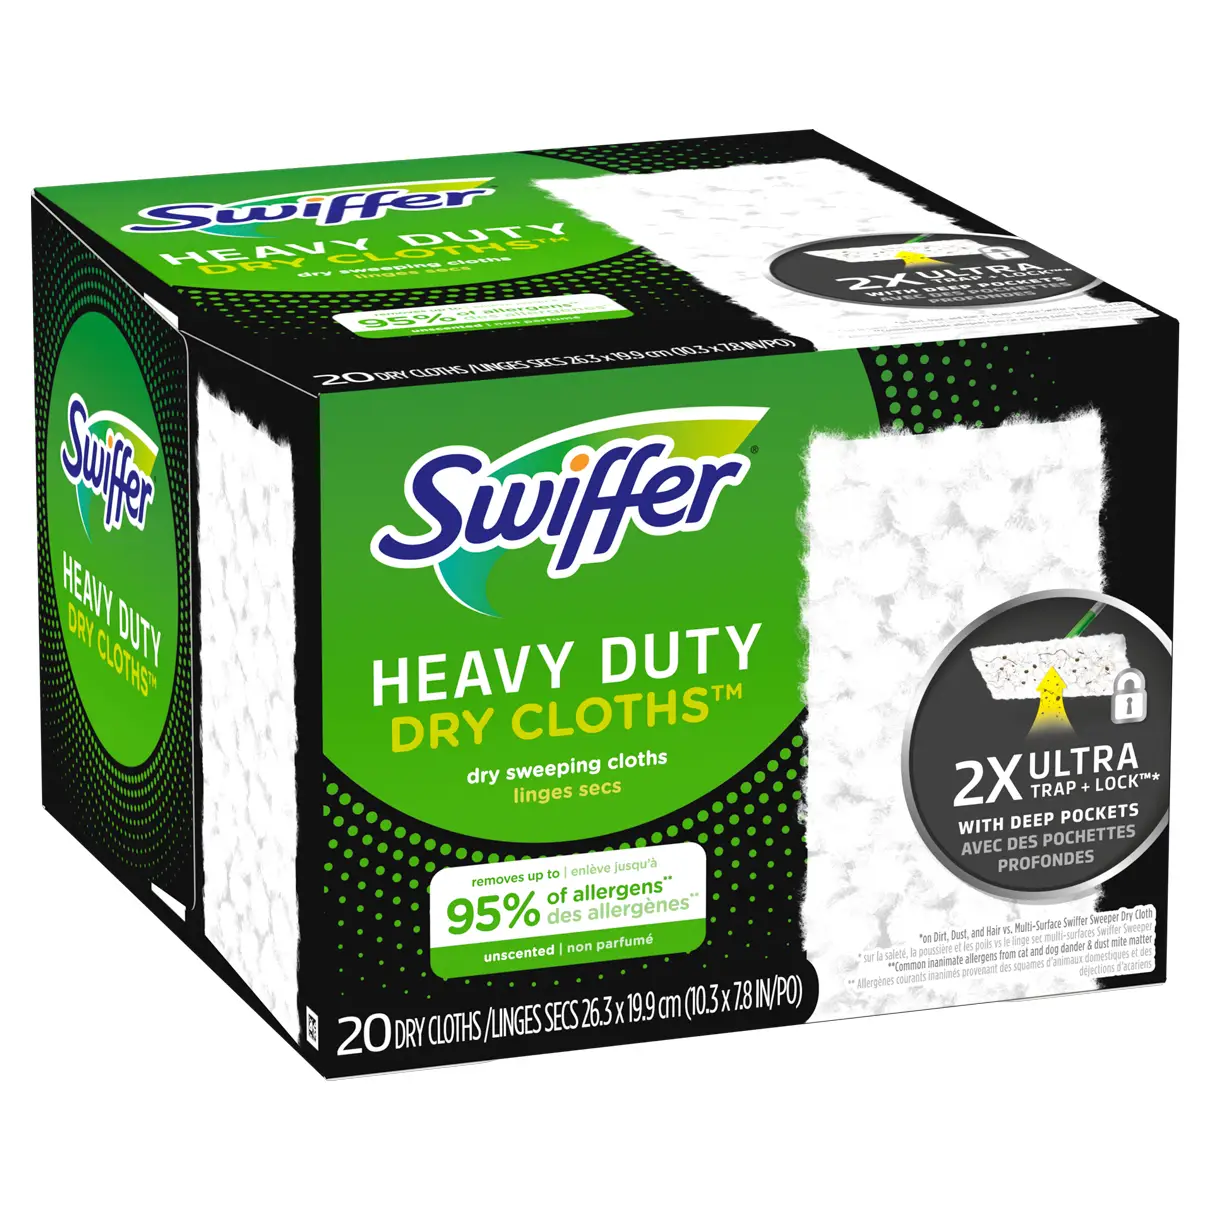 My favorite dust wipes are discontinued. Anyone know of any